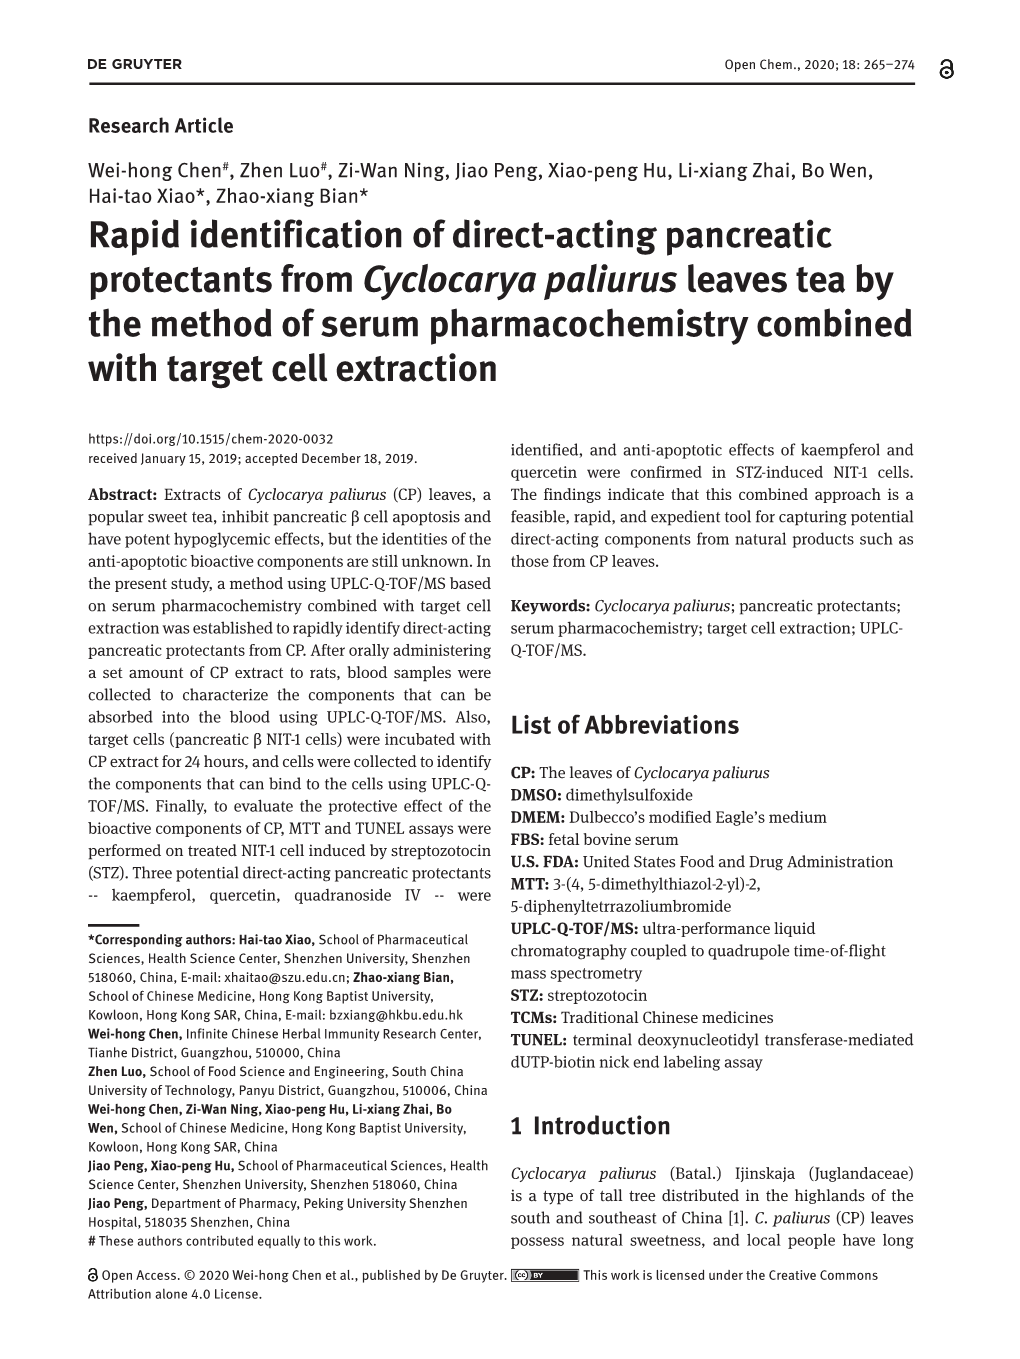 Rapid Identification of Direct-Acting Pancreatic Protectants From